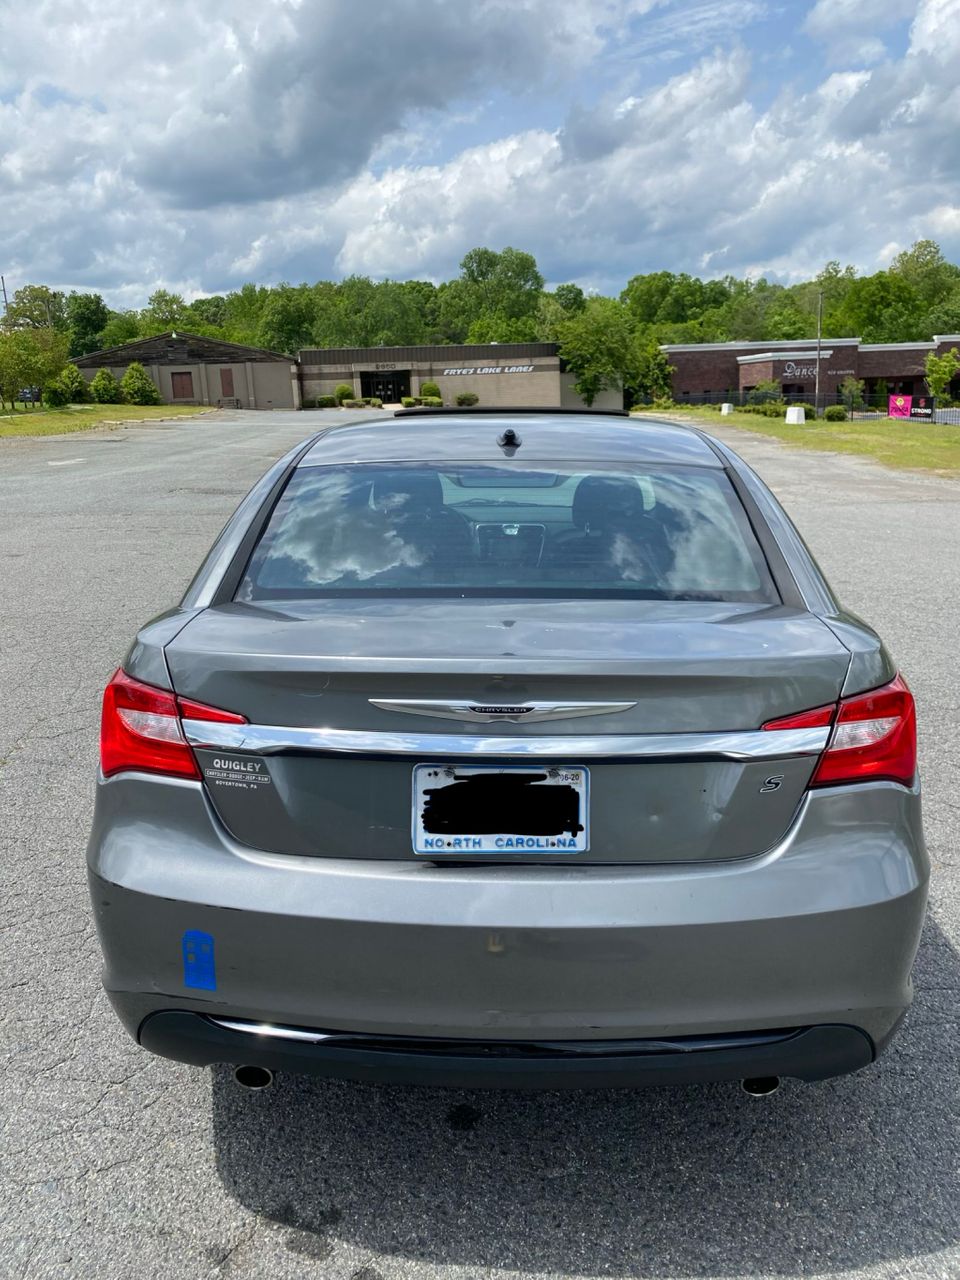 2012 Chrysler 200 Touring | Concord, NC, Tungsten Metallic Clear Coat (Gray), Front Wheel